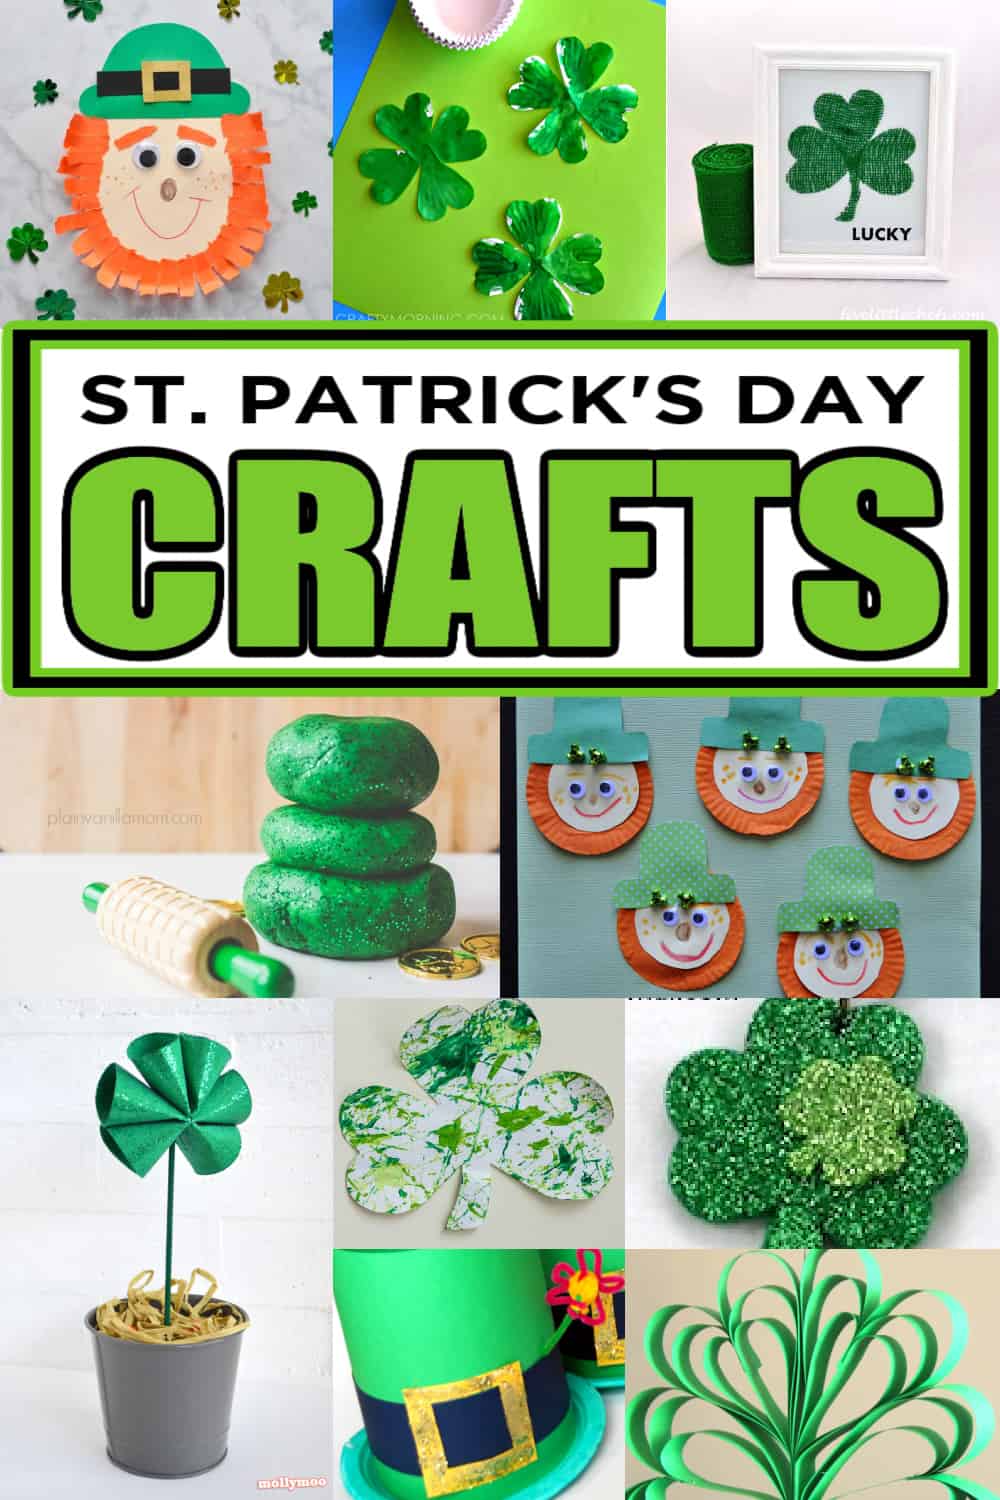 50+ St. Patrick's Day Crafts for Kids - Made with Happy